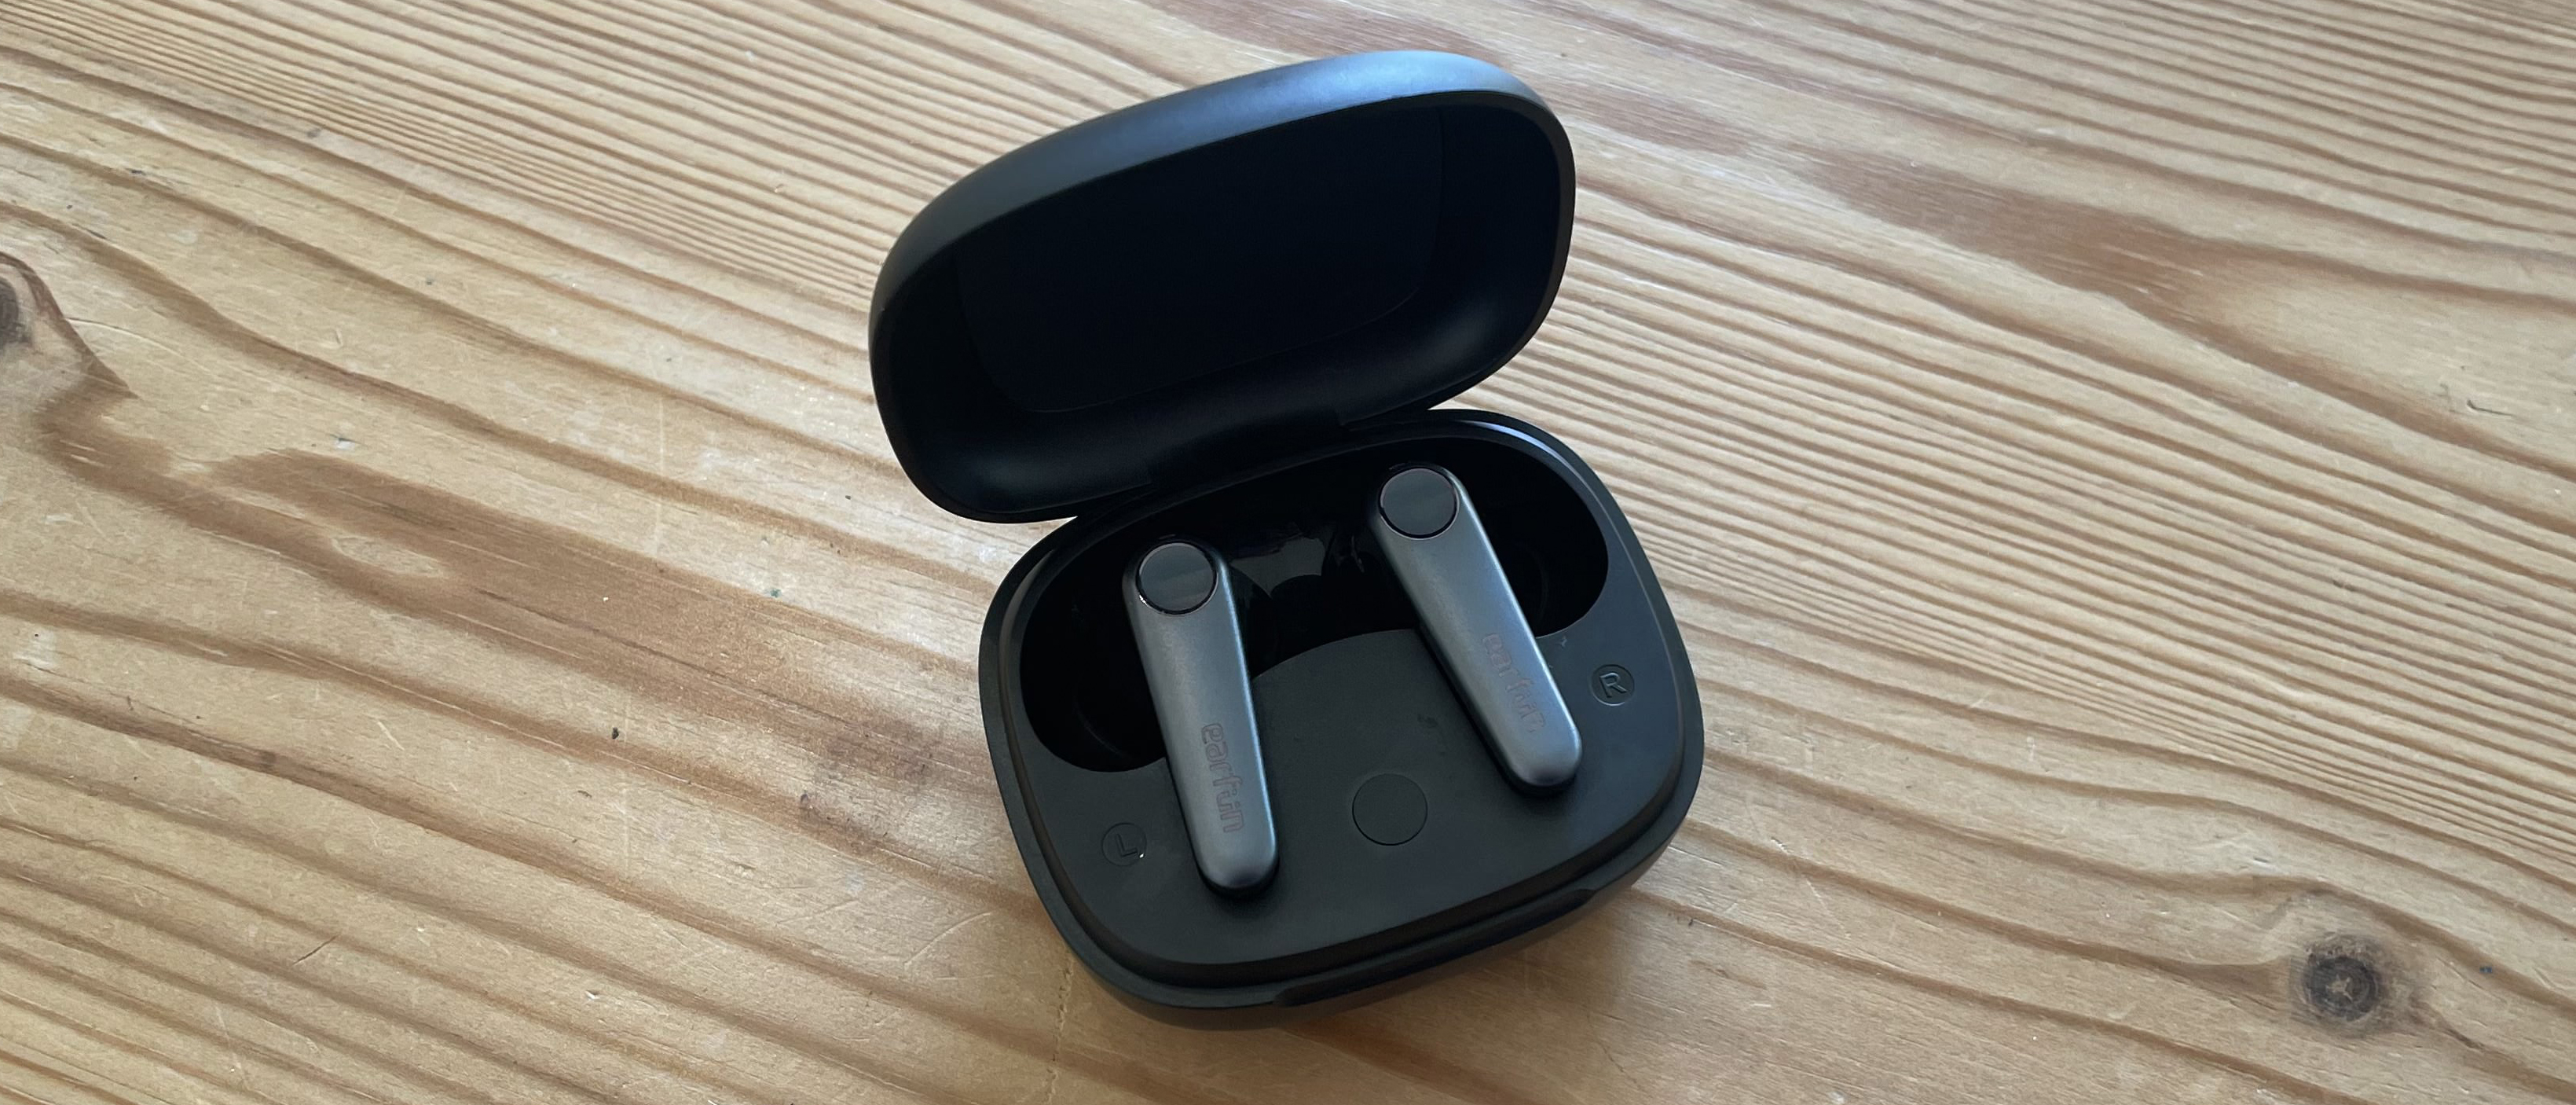 Samsung Launches Earbuds With Noise-Canceling To Beat AirPods Pro